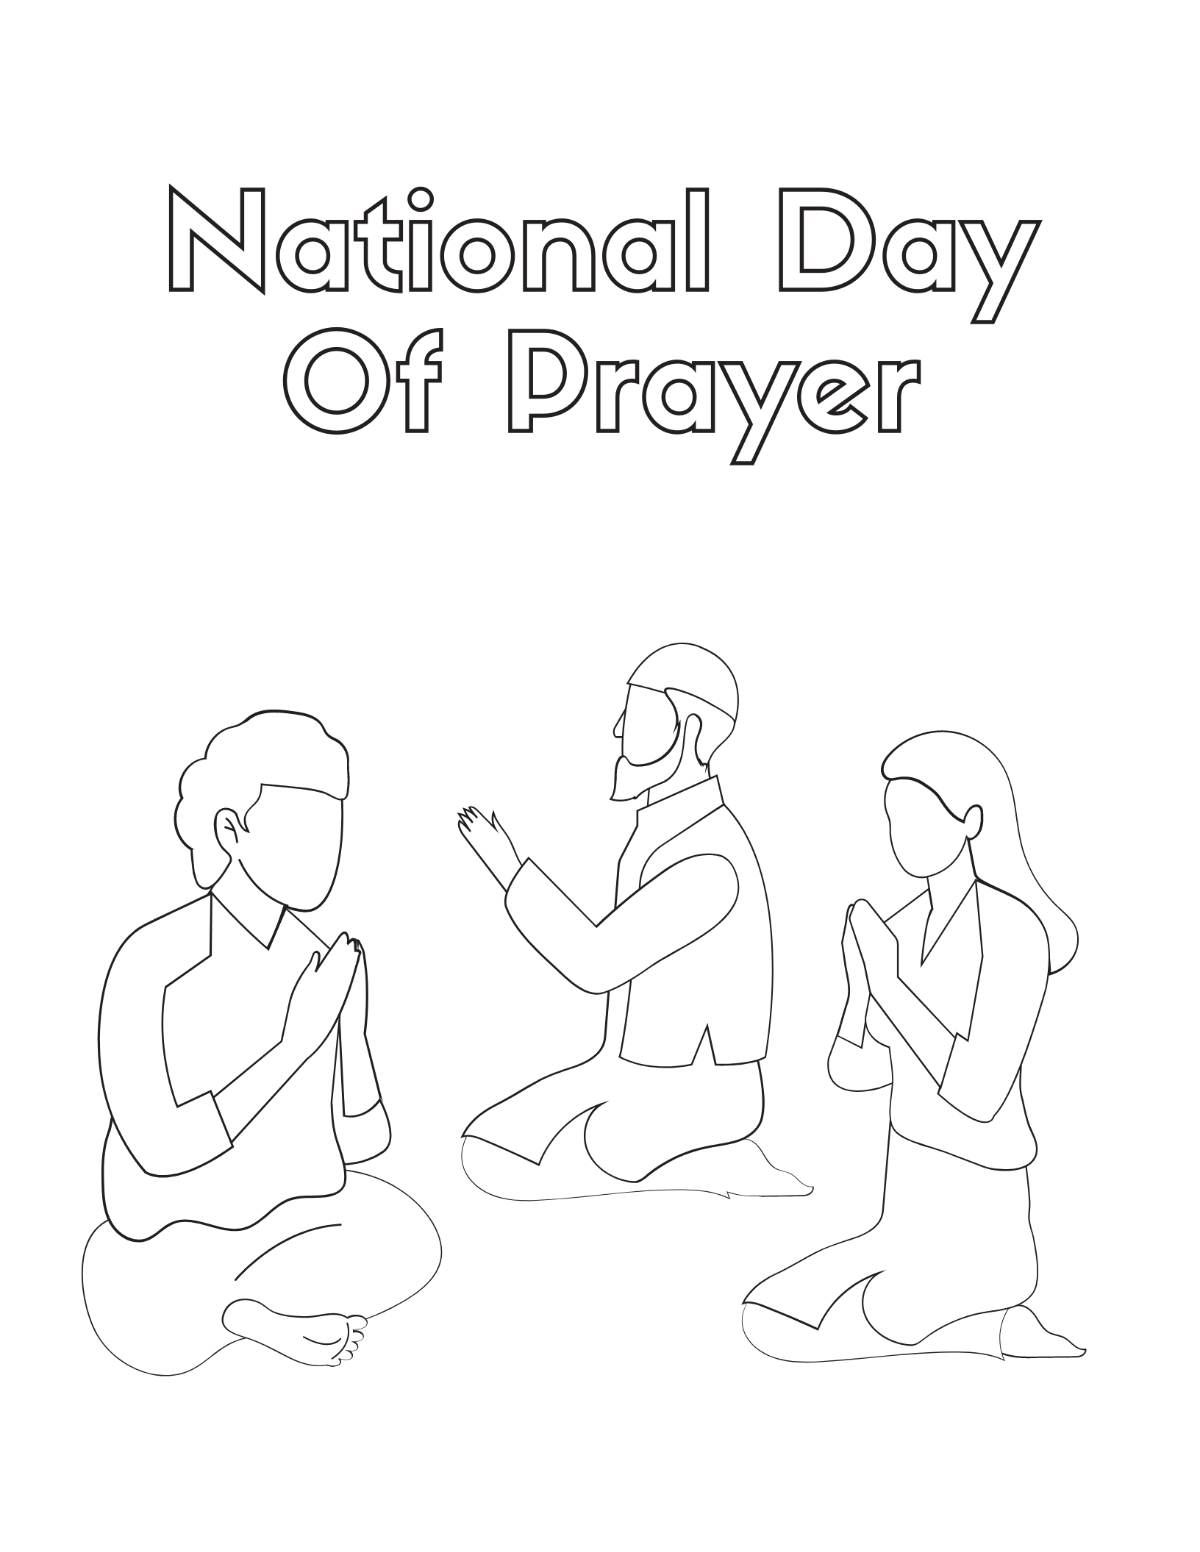 National Day Of Prayer Coloring Page Template